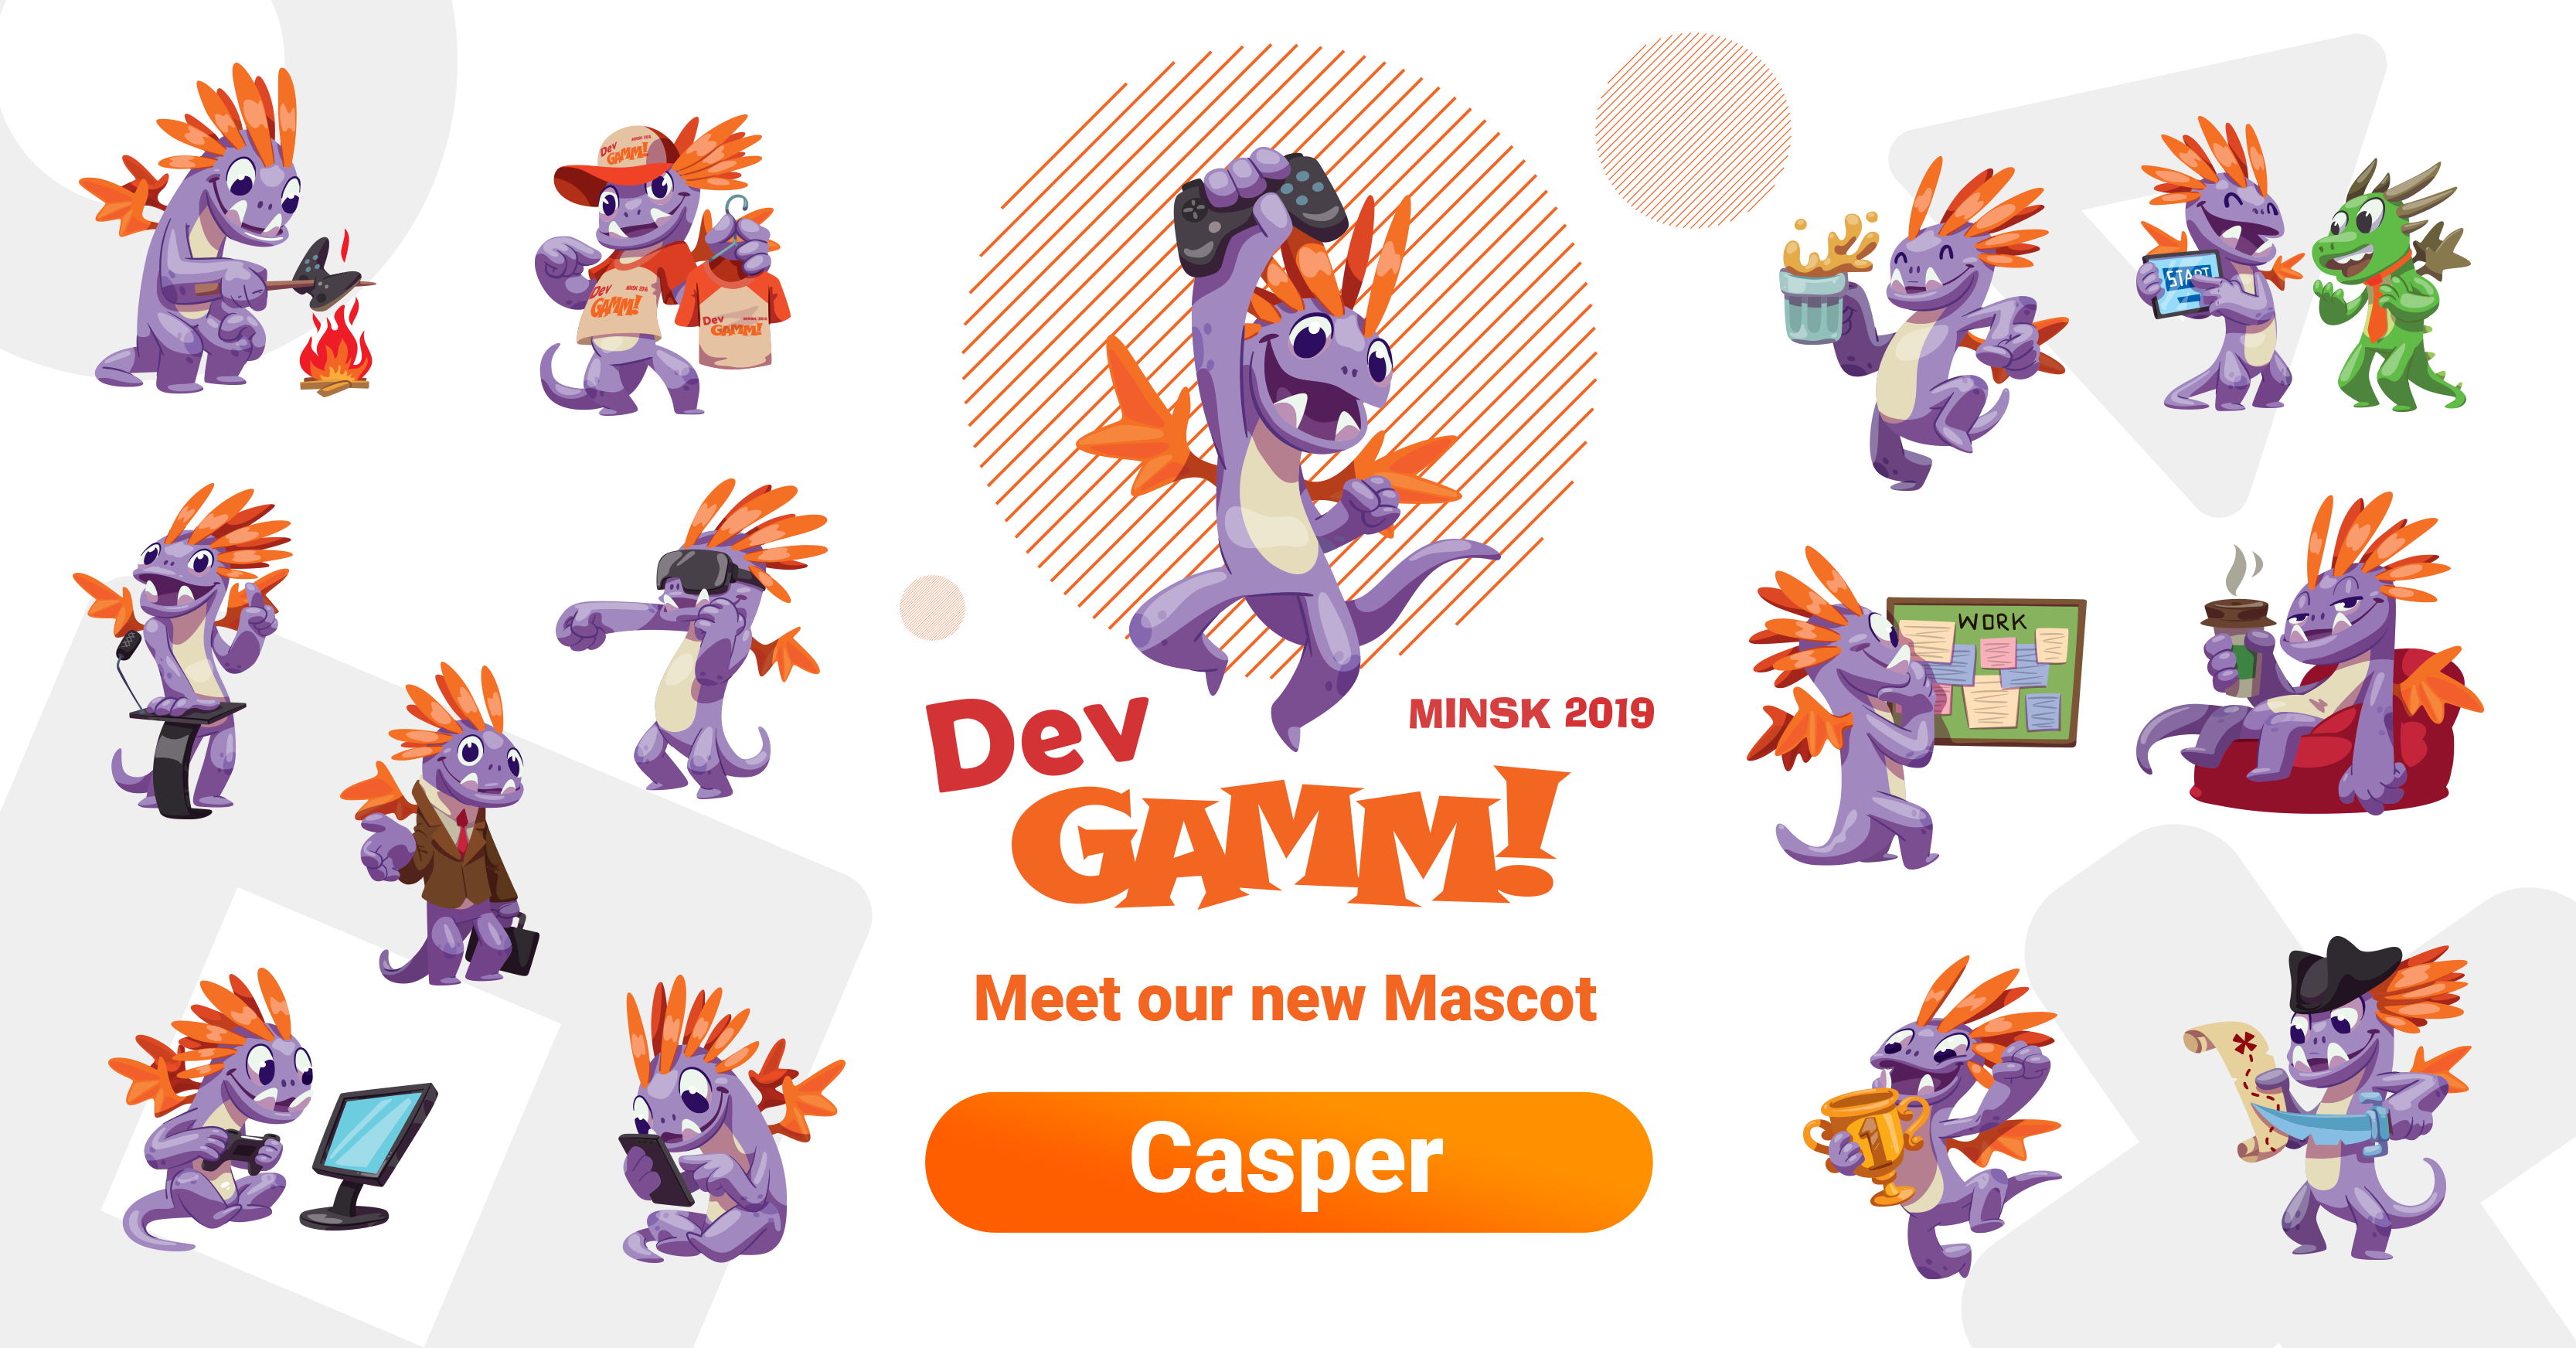 You are currently viewing The Story of Casper Dragon: New Mascot of DevGAMM